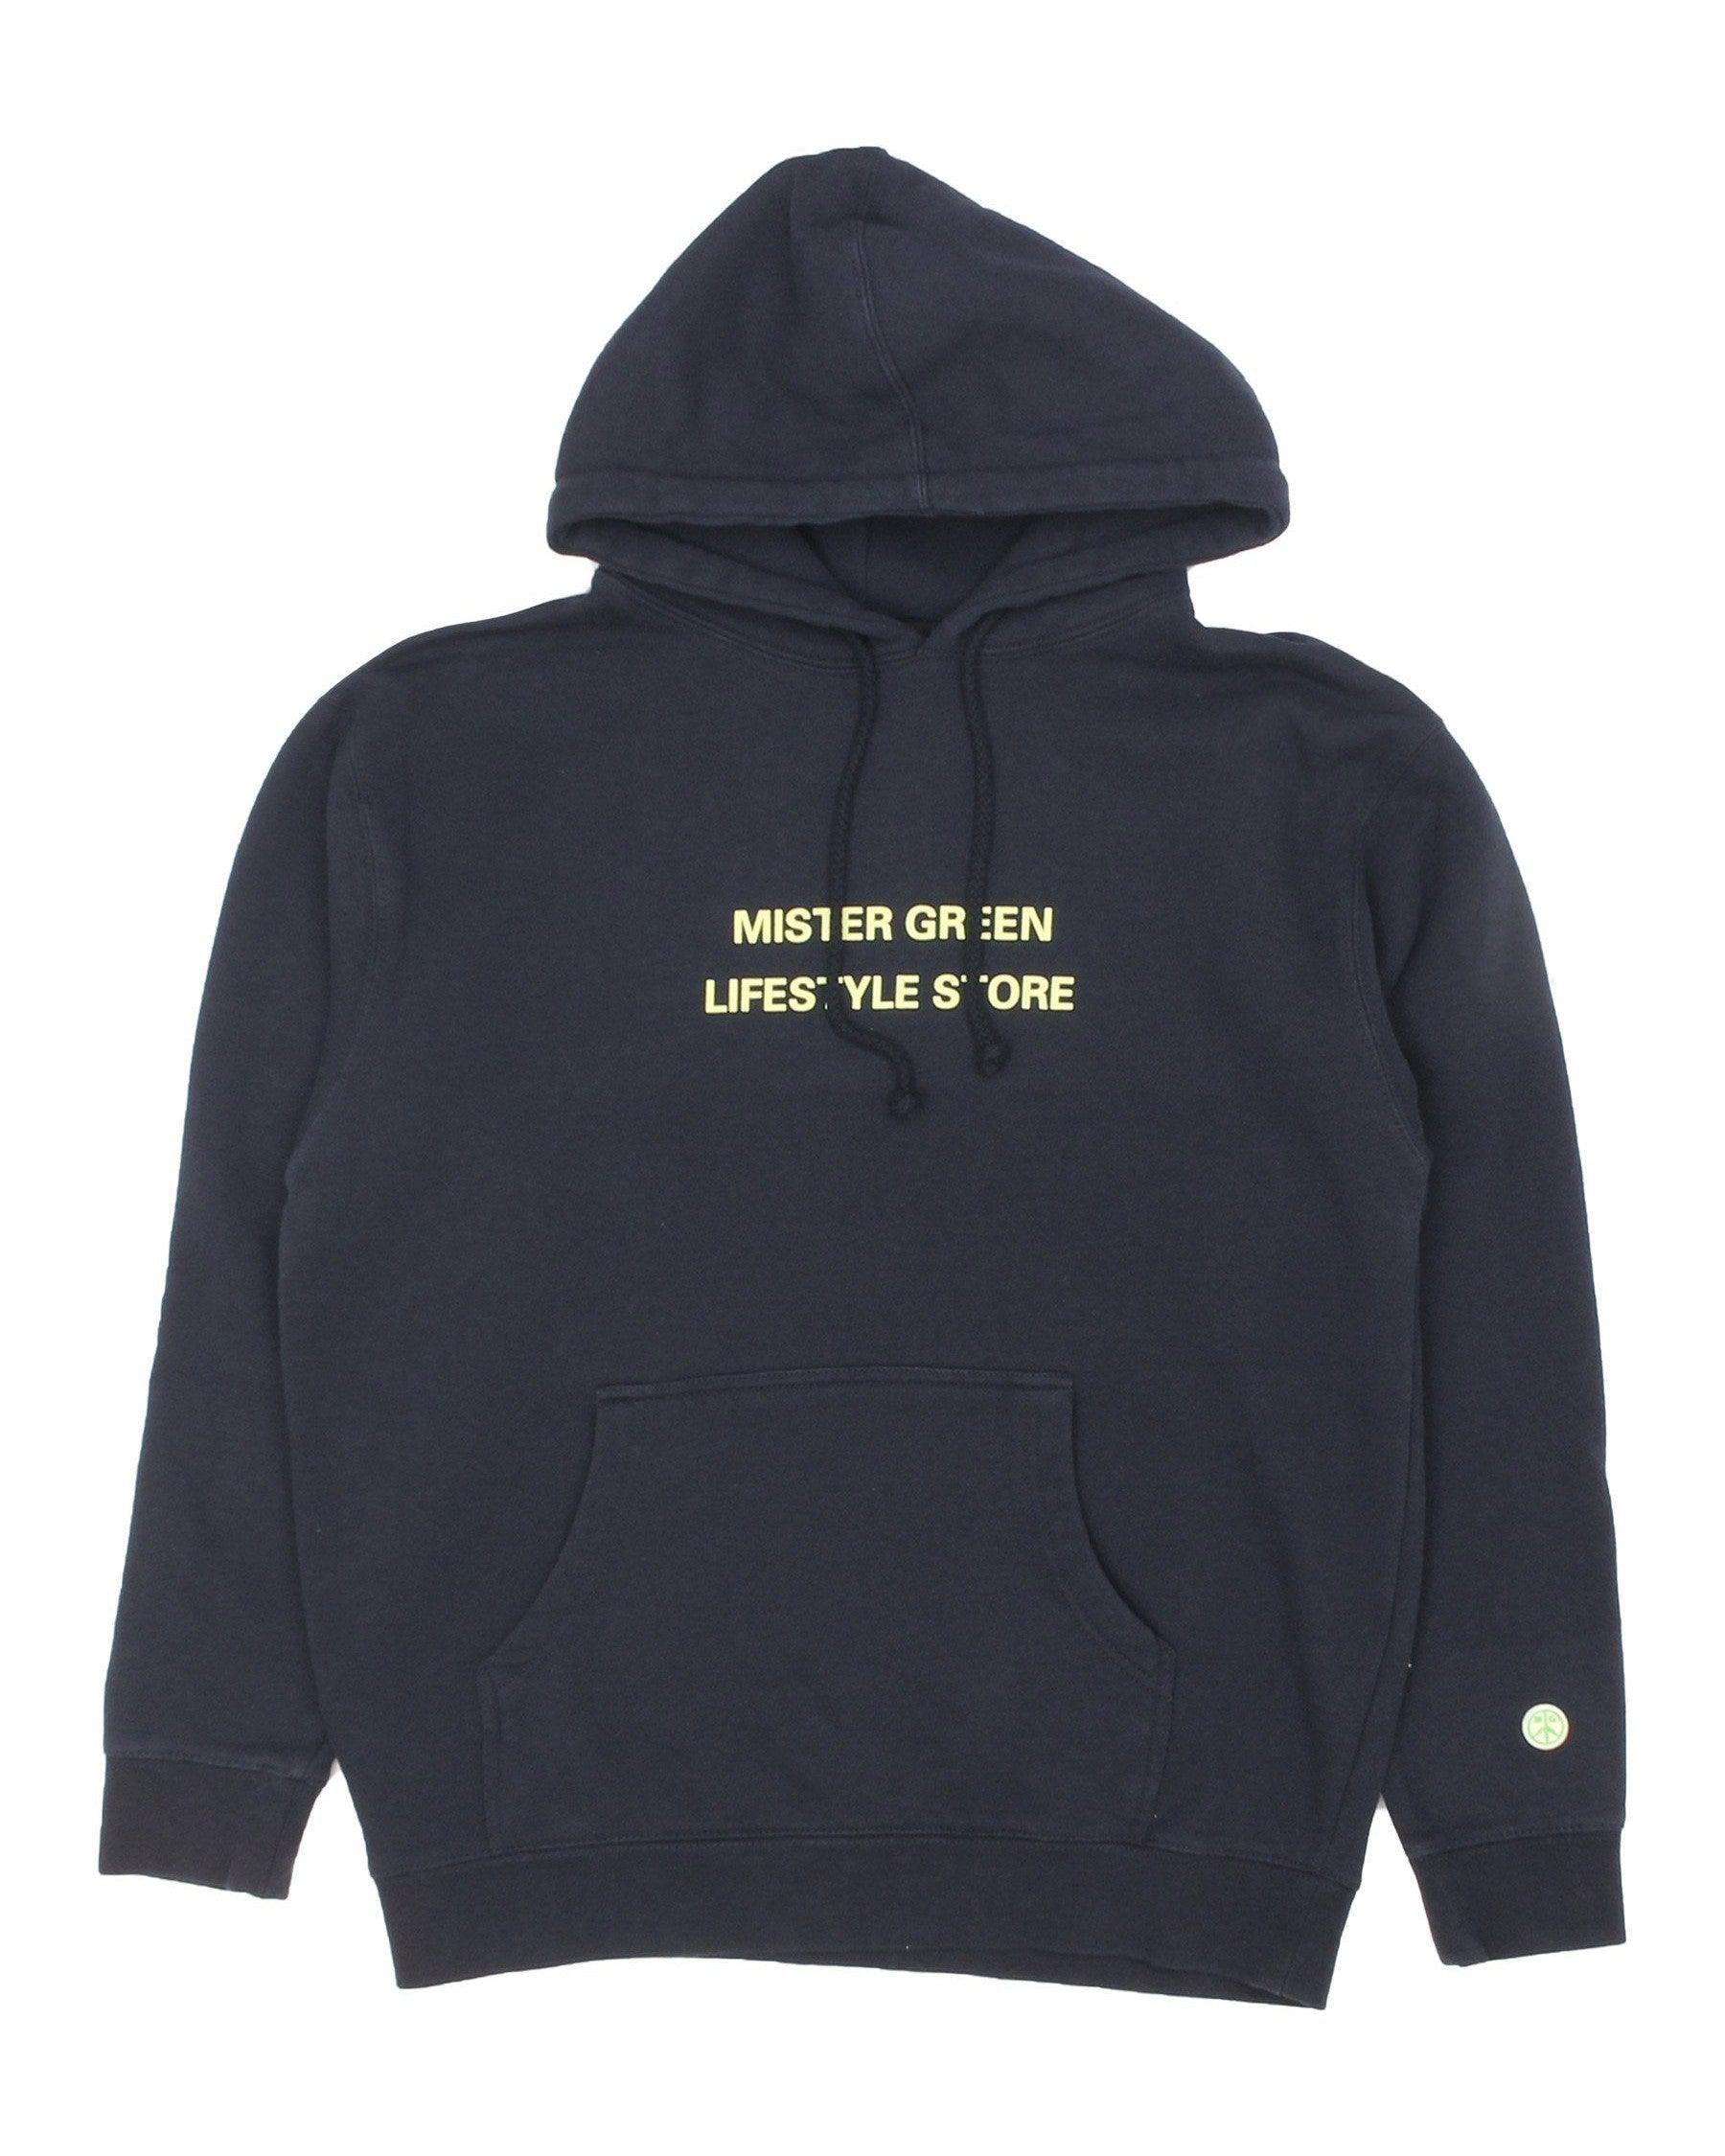 No 1 Hoodie - Navy-Mister Green-Mister Green